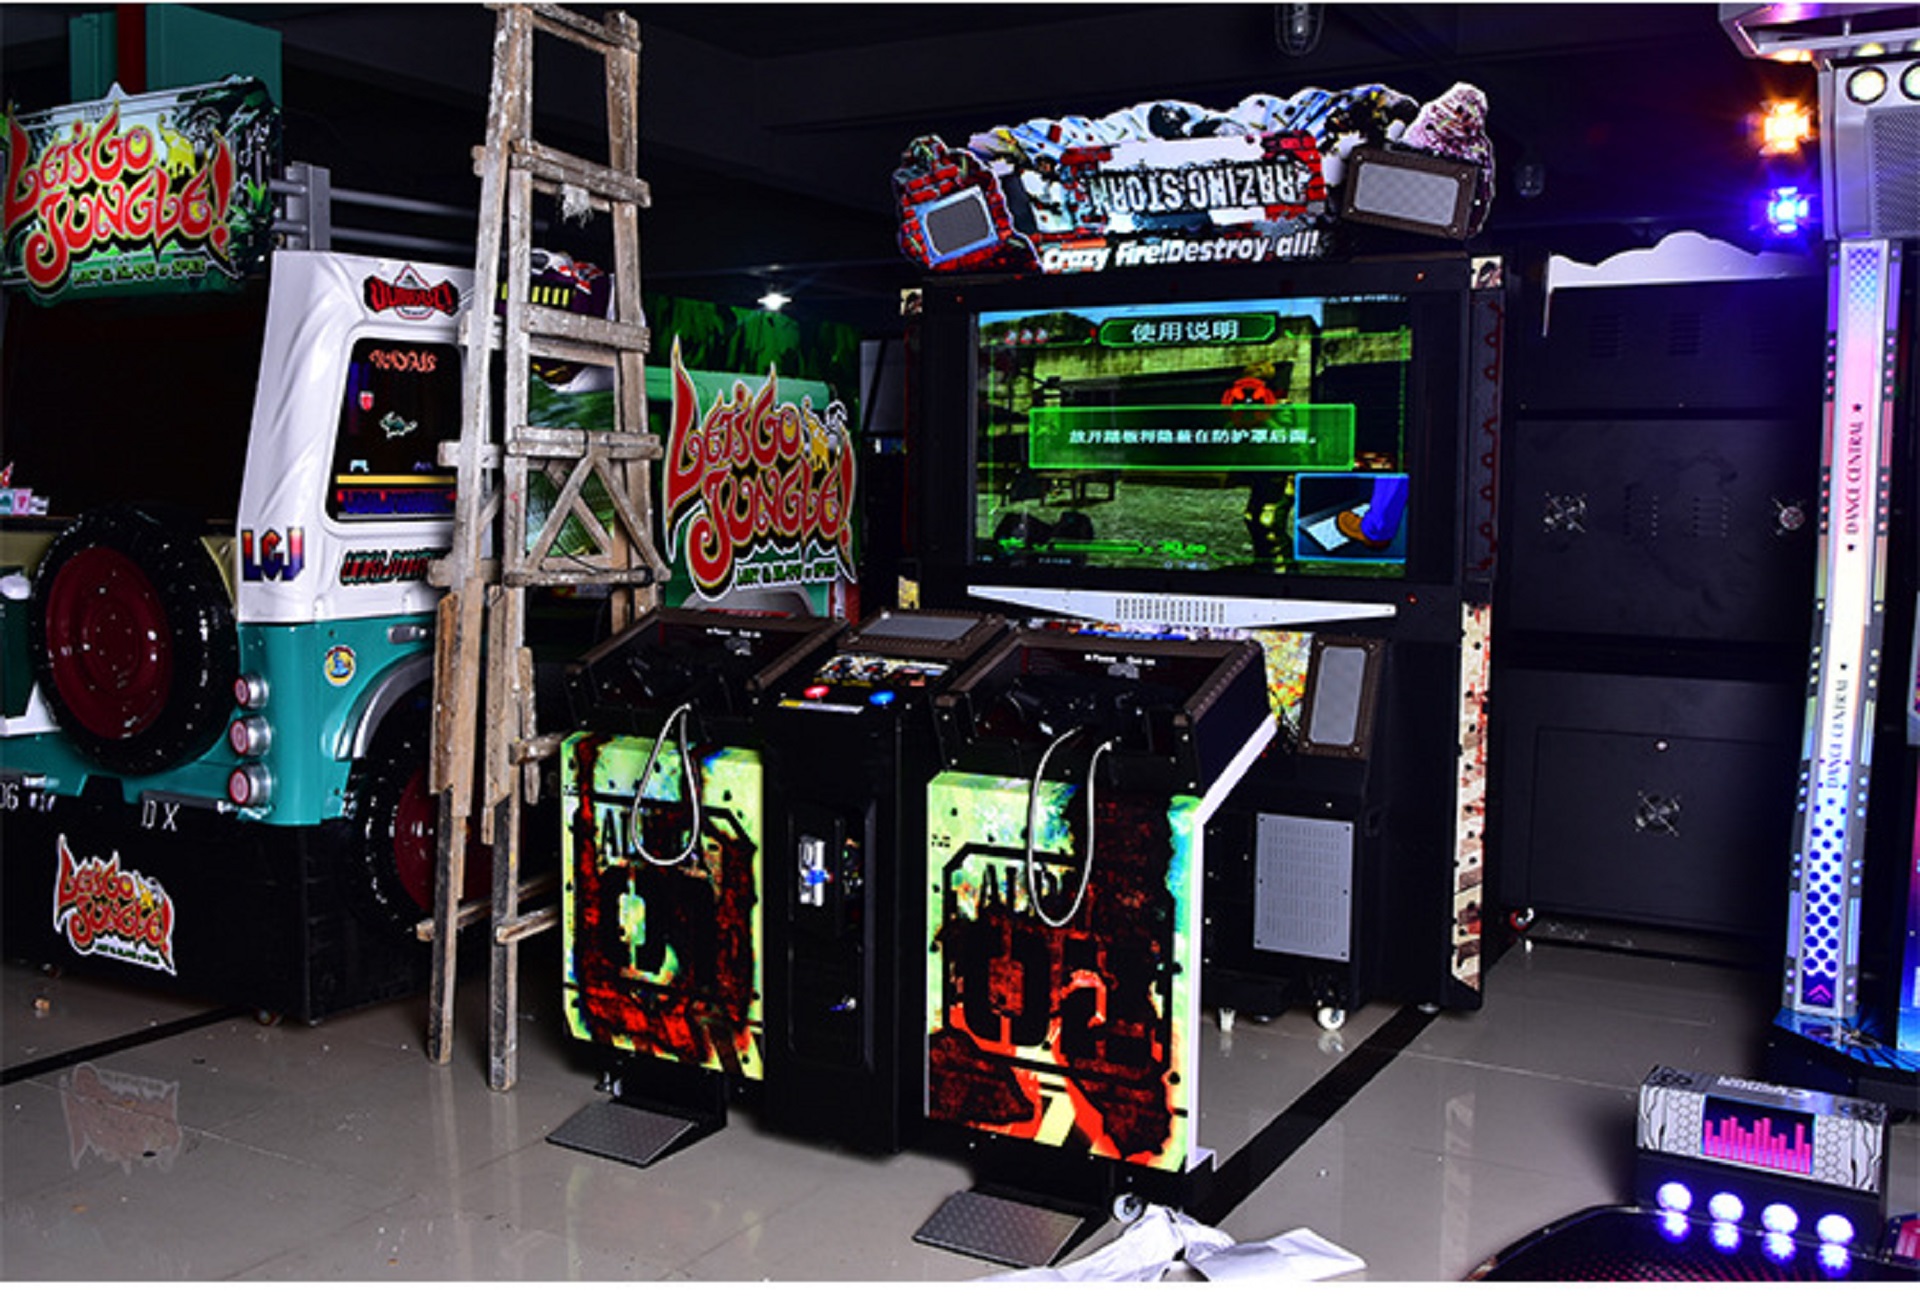 Razing-Storm-Shooting-arcade-game-machine-Hot-sale-China-Direct-55-inch-Coin-Operated-With-Special-Gun-Dynamic-platform-Wholesales-video-Games-Tomy-Arcade.jpg